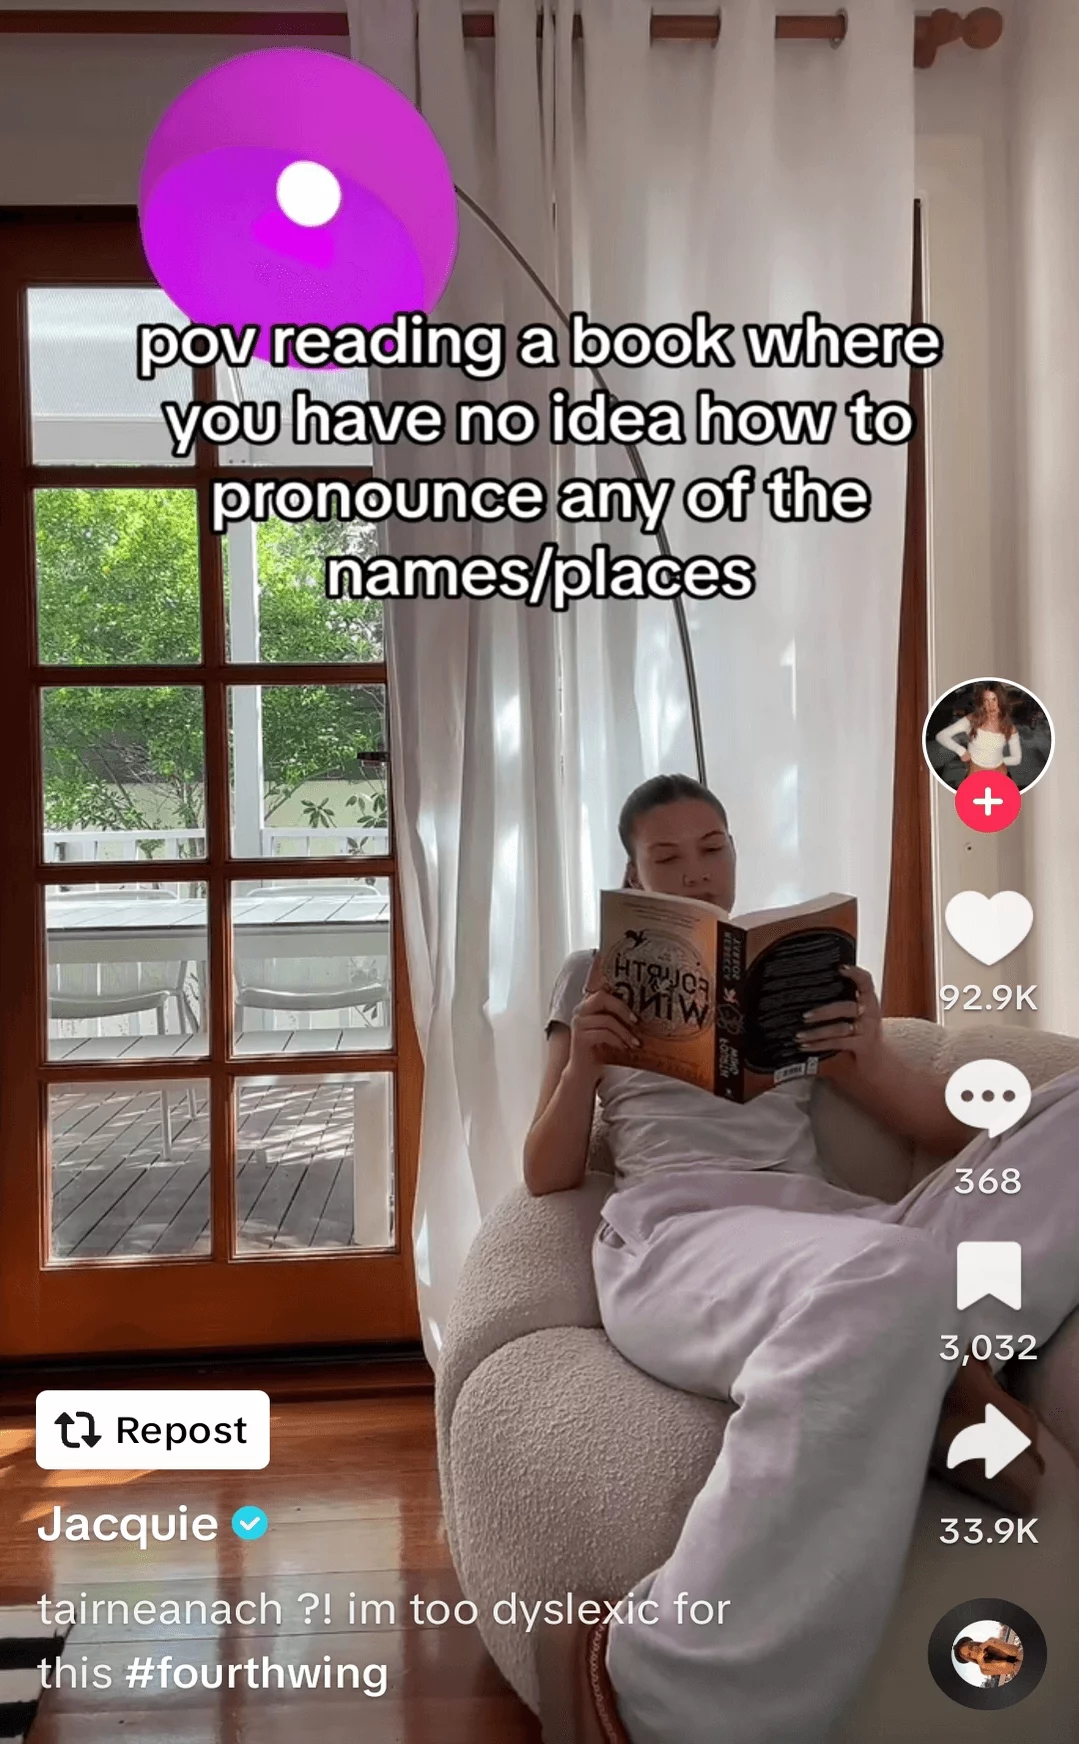 Woman relaxing in a cozy nook by a window, deeply engaged in reading a book, depicted in a social media post.